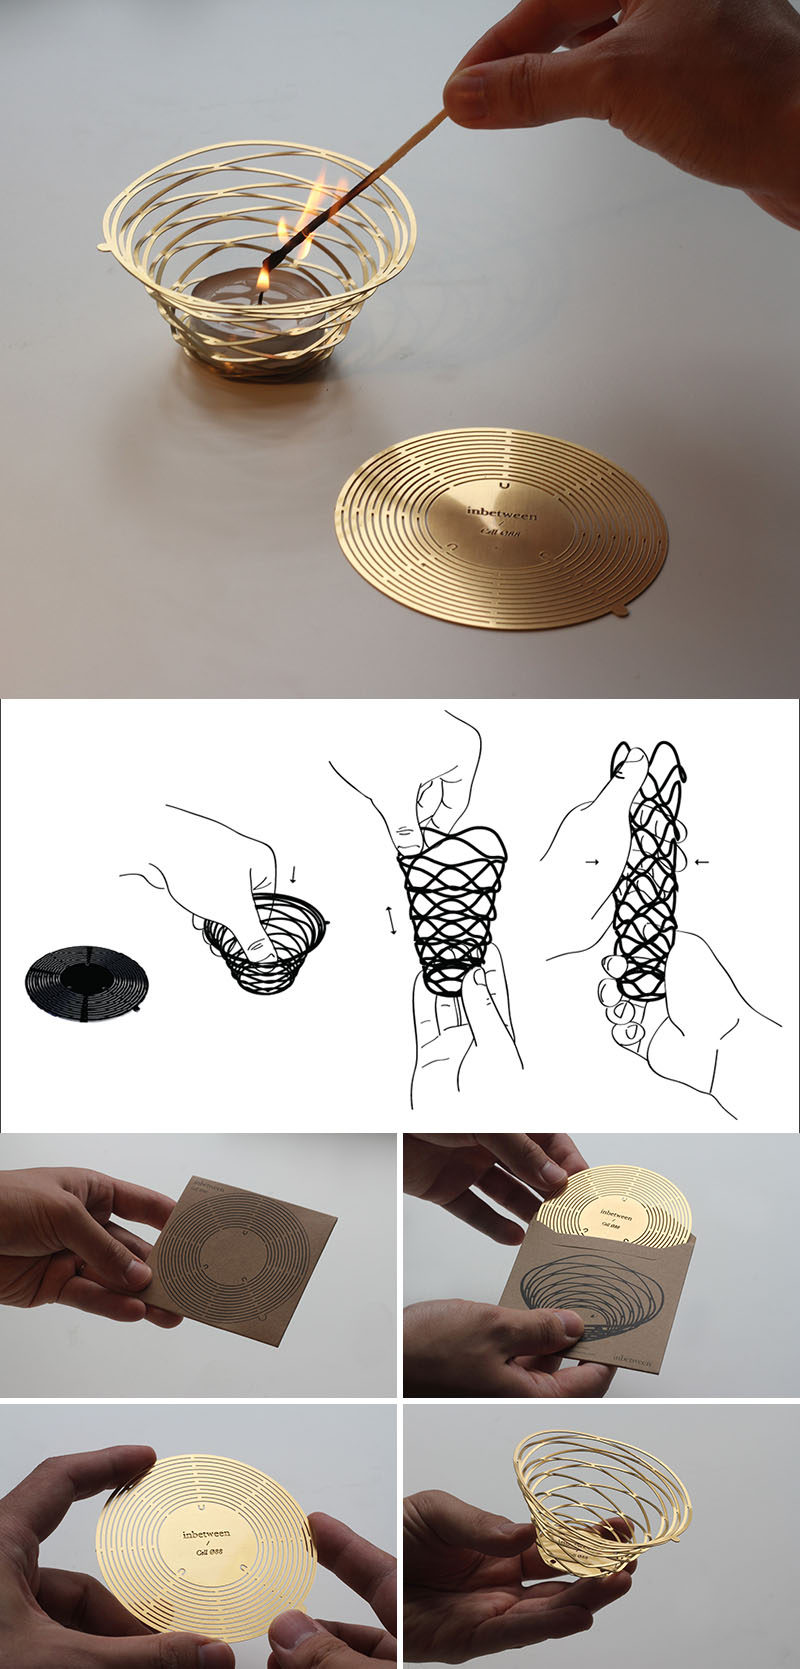 This minimalist metal candle holder starts out as a brass disc and can be formed into a modern tealight holder with just the use of your hands, making it a great way to add a personal touch to your home decor. 